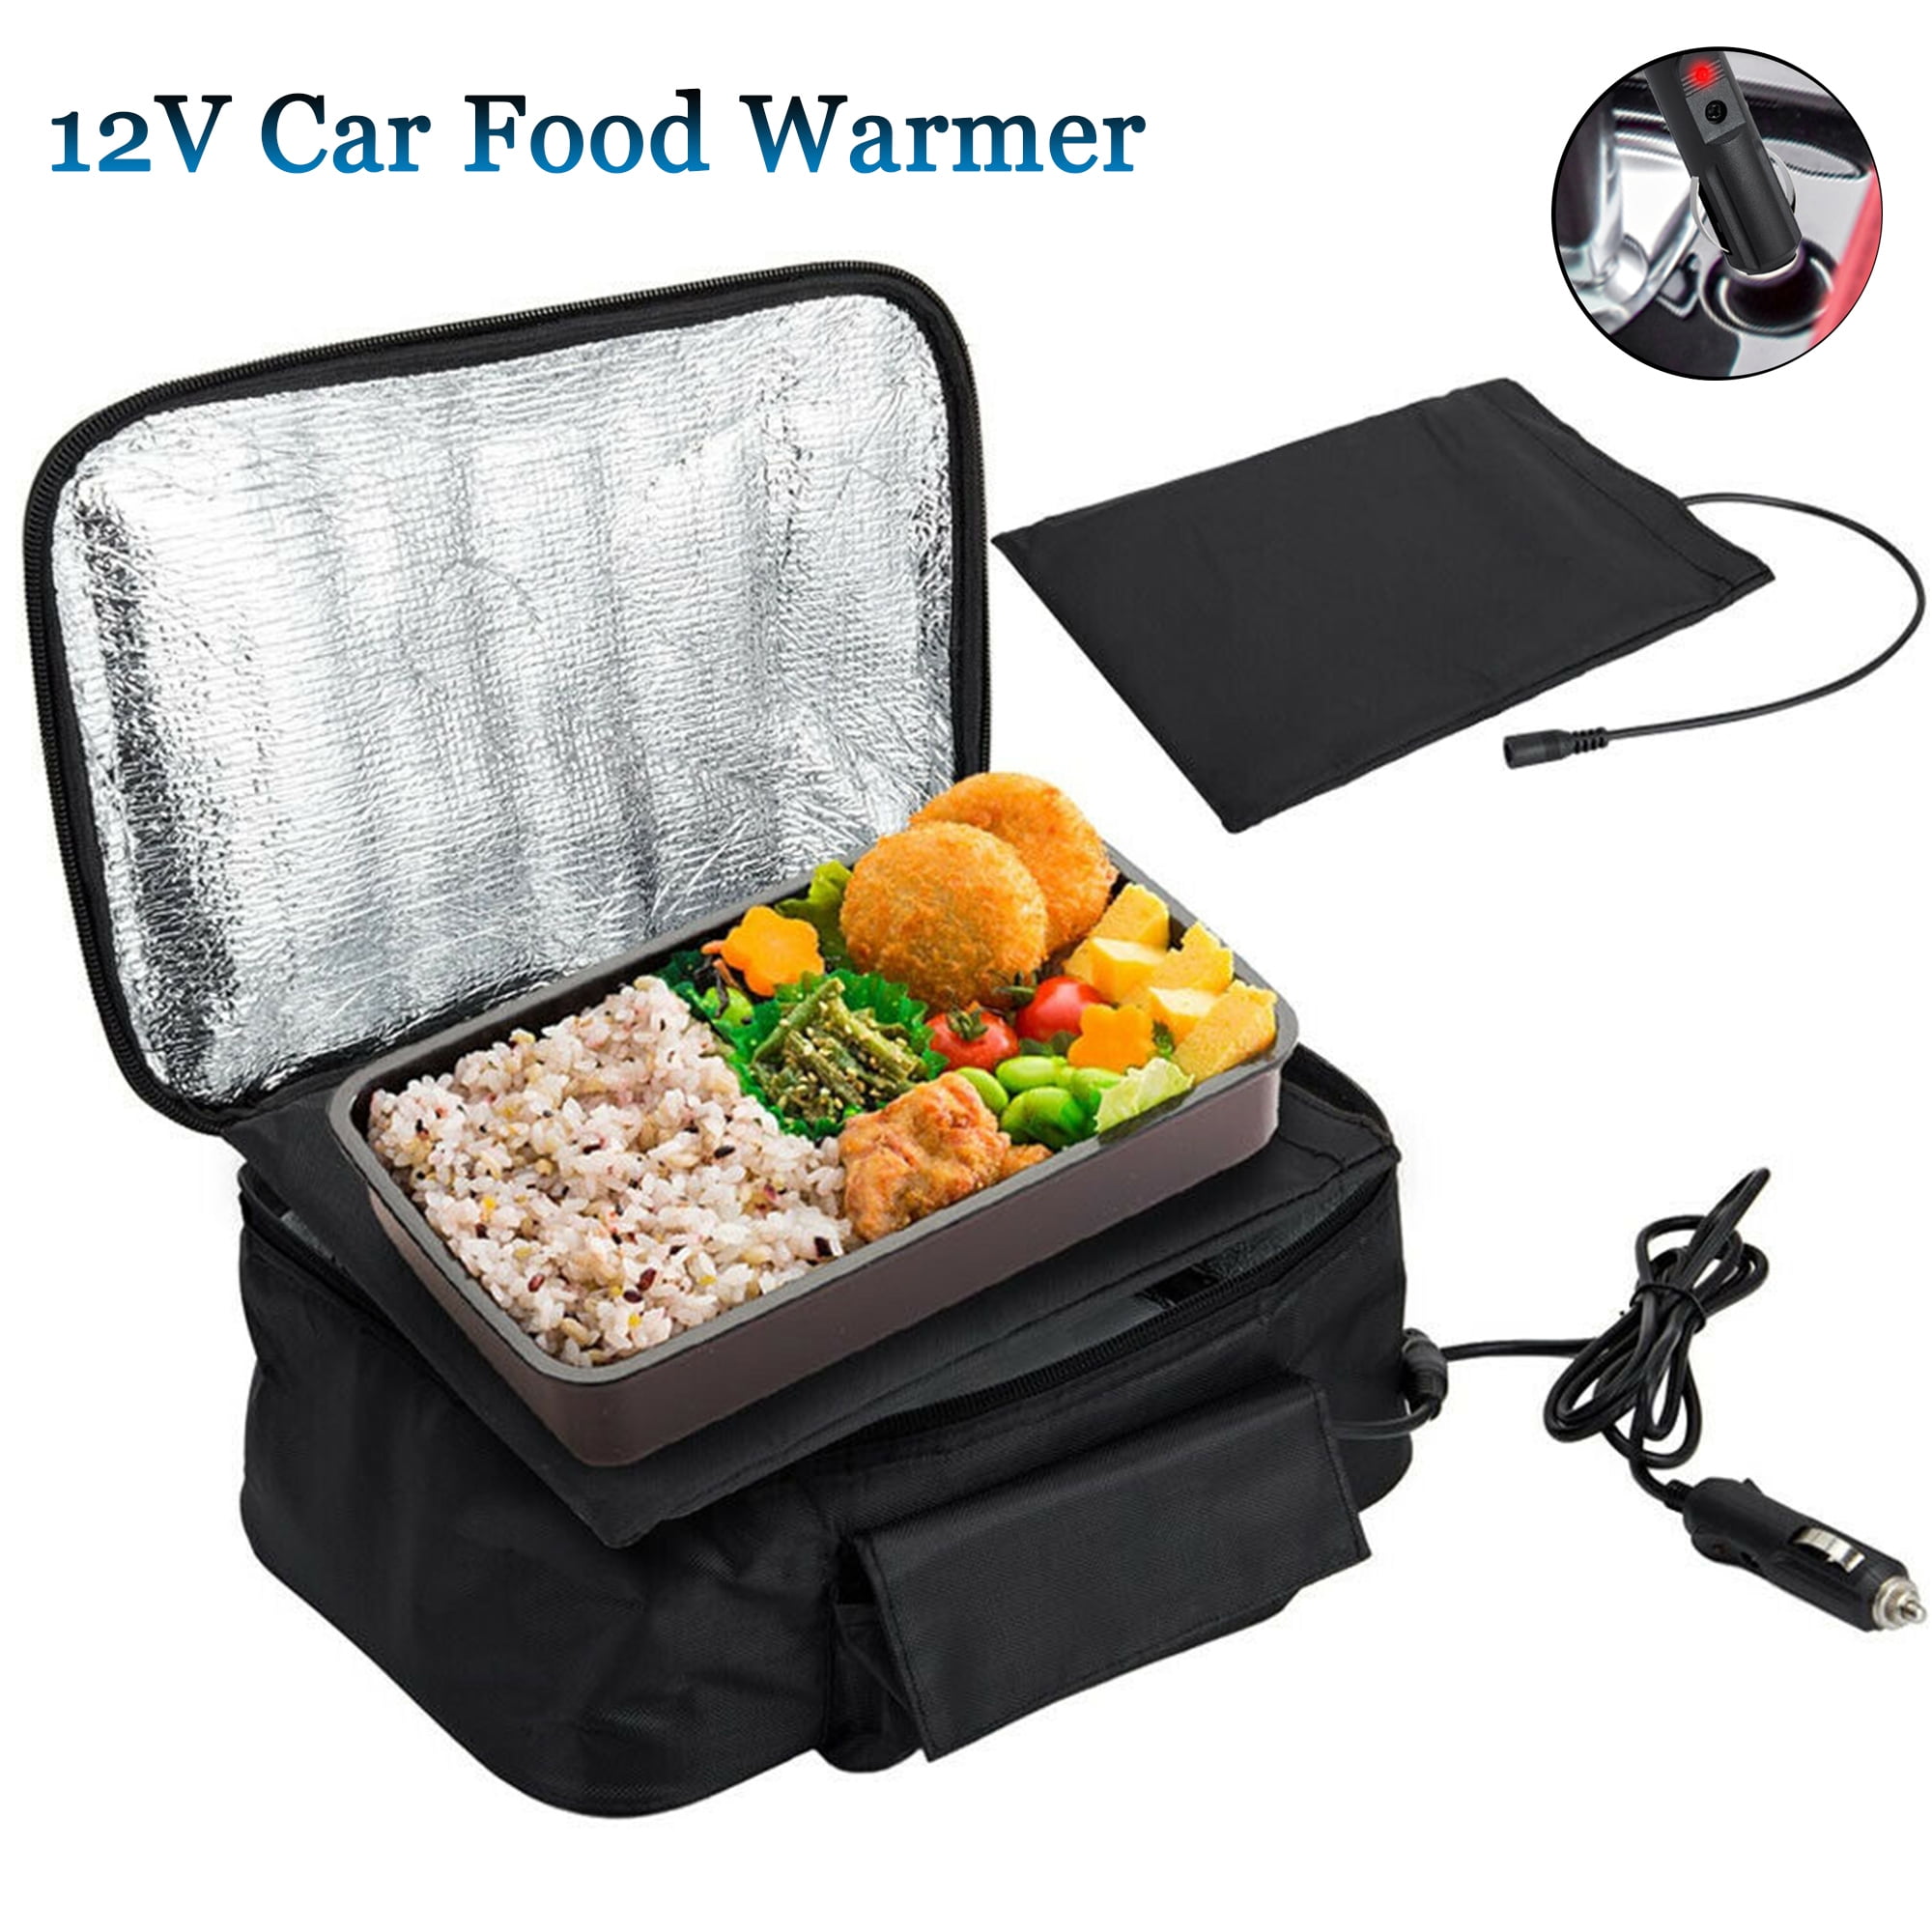 Home & Car Lunch Box Bag Container Electric Food Warmer Heating Oven  Black Carry | eBay